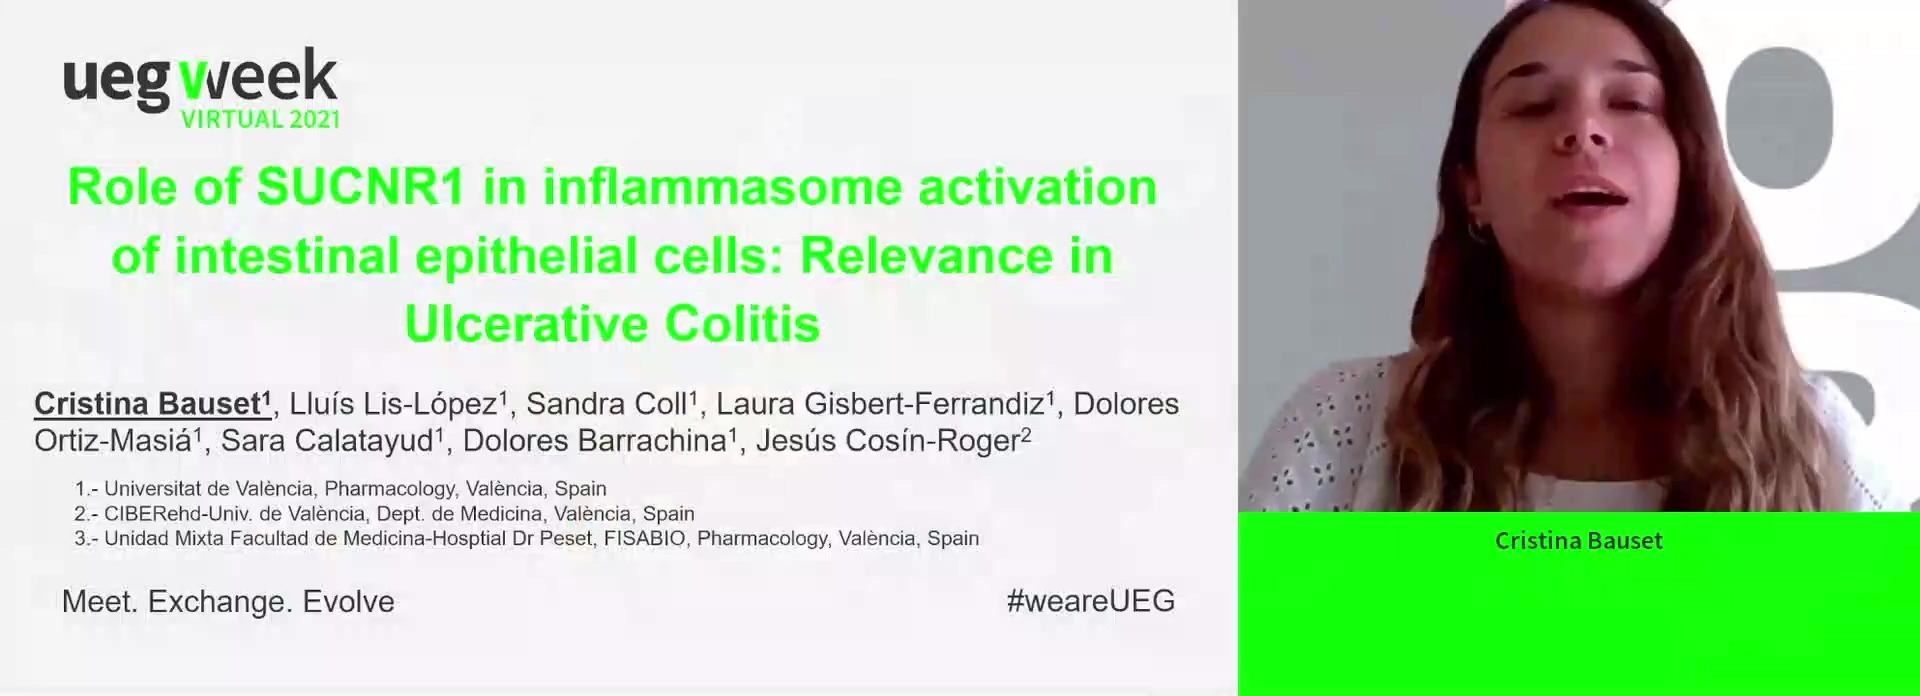 ROLE OF SUCNR1 IN INFLAMMASOME ACTIVATION OF INTESTINAL EPITHELIAL CELLS: RELEVANCE IN ULCERATIVE COLITIS